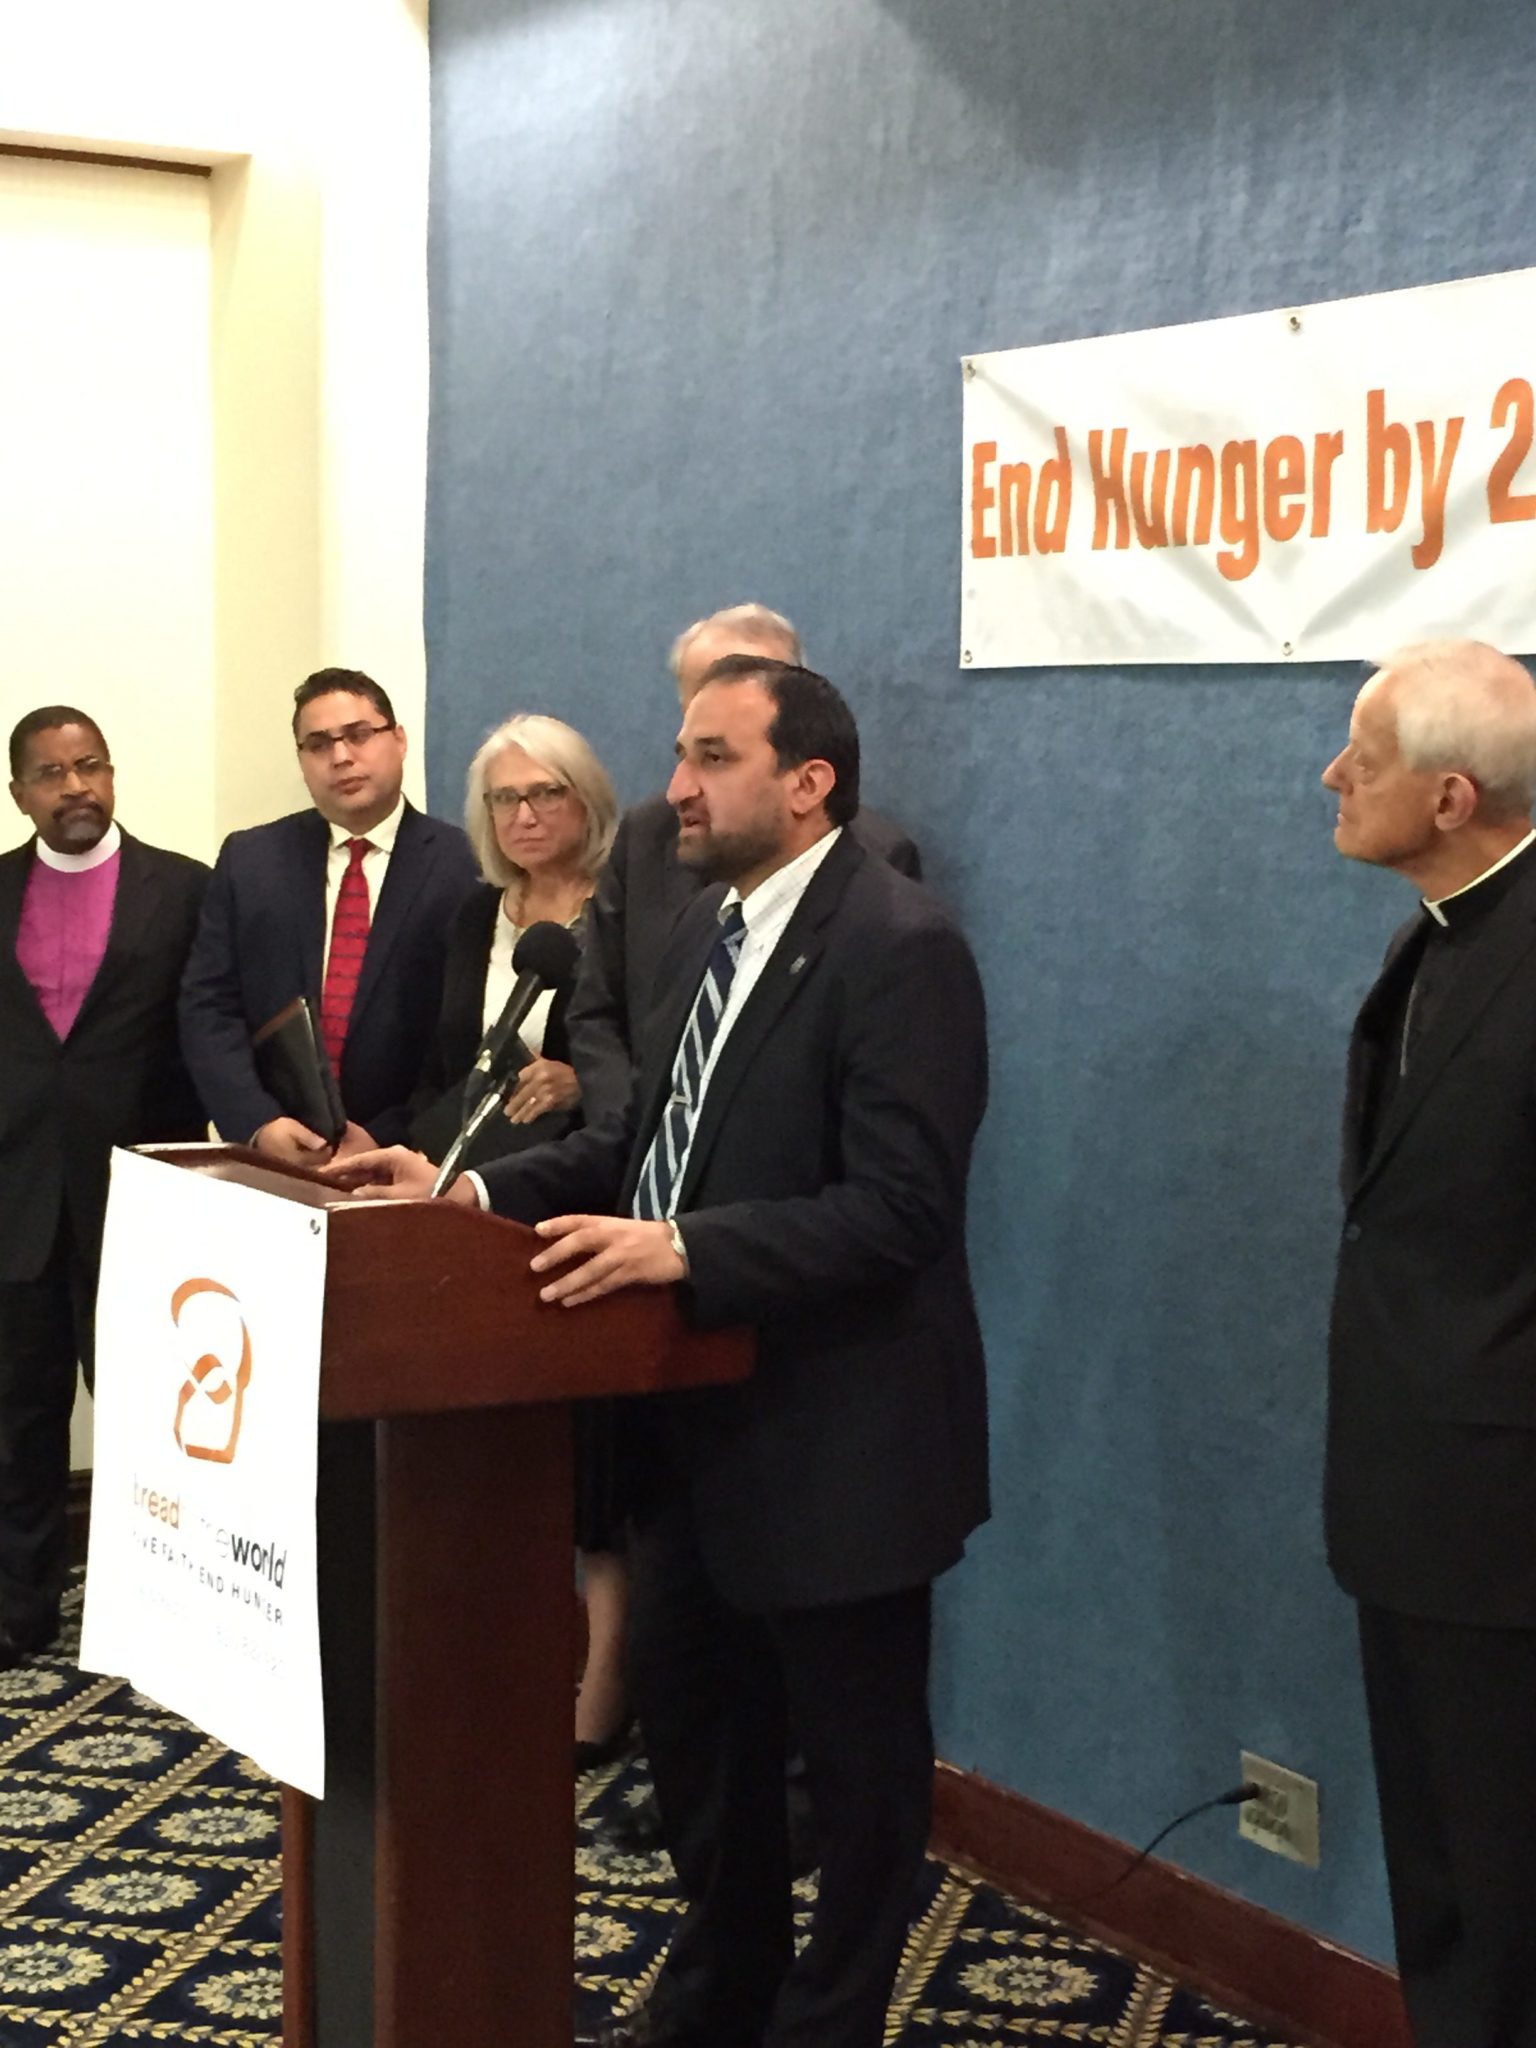 Anwar Khan, CEO of Islamic Relief, speaks at this morning's press conference organized by Bread for the World. Jennifer Gonzalez, Bread for the World